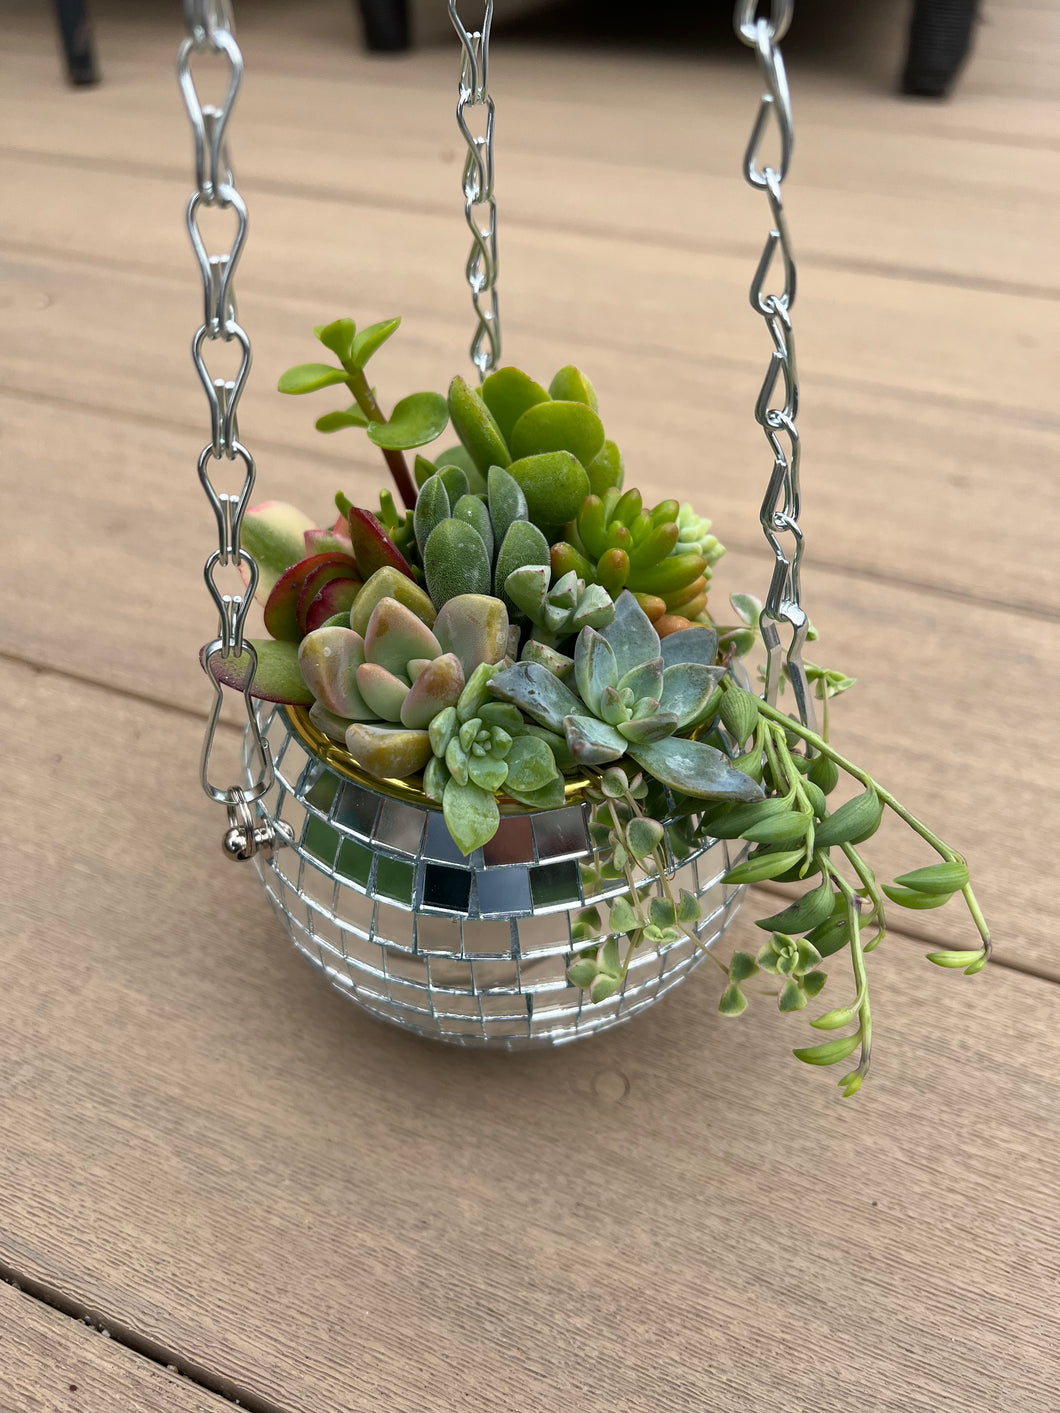 Disco ball hanging planter, Comes With A Assortment of Succulent Cuttings to Make Your Own Planter